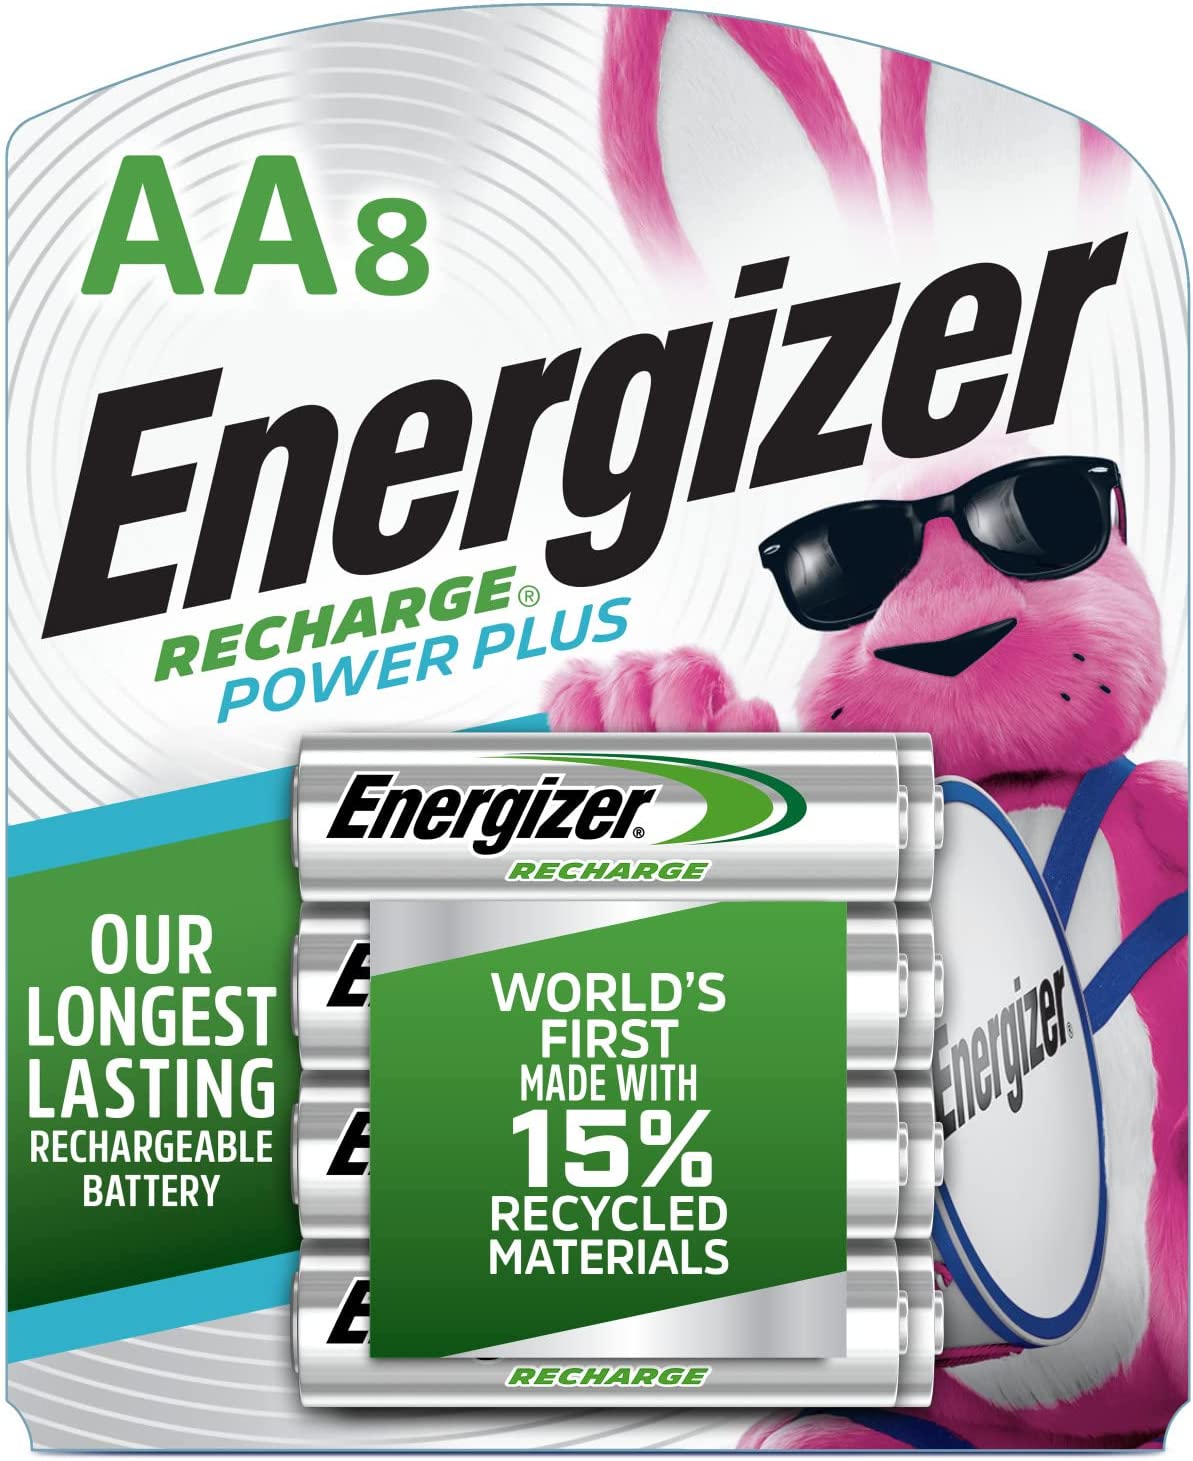 Energizer Recycled Materials Rechargeable AA Batteries, 8-Pack